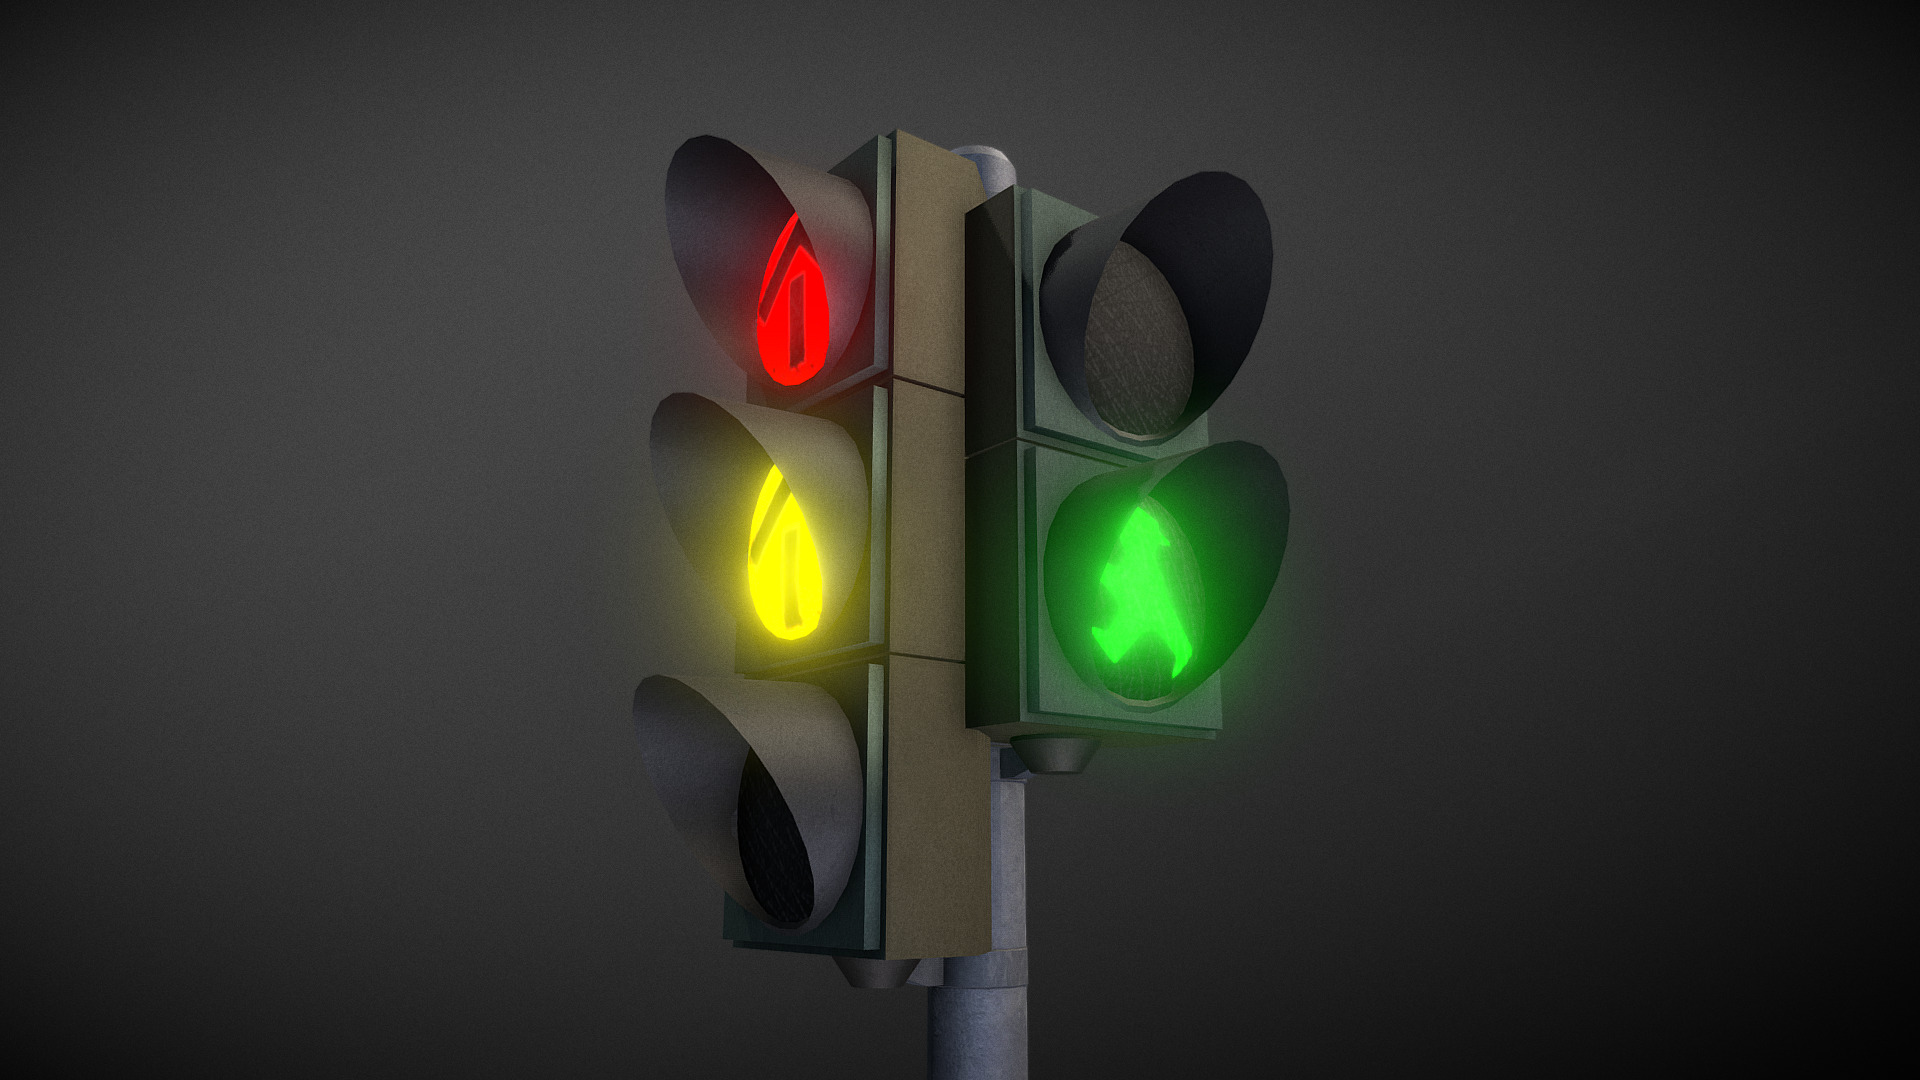 3D model Ampel mit Animation (ostdeutsche Variante) - This is a 3D model of the Ampel mit Animation (ostdeutsche Variante). The 3D model is about a traffic light with green and red.